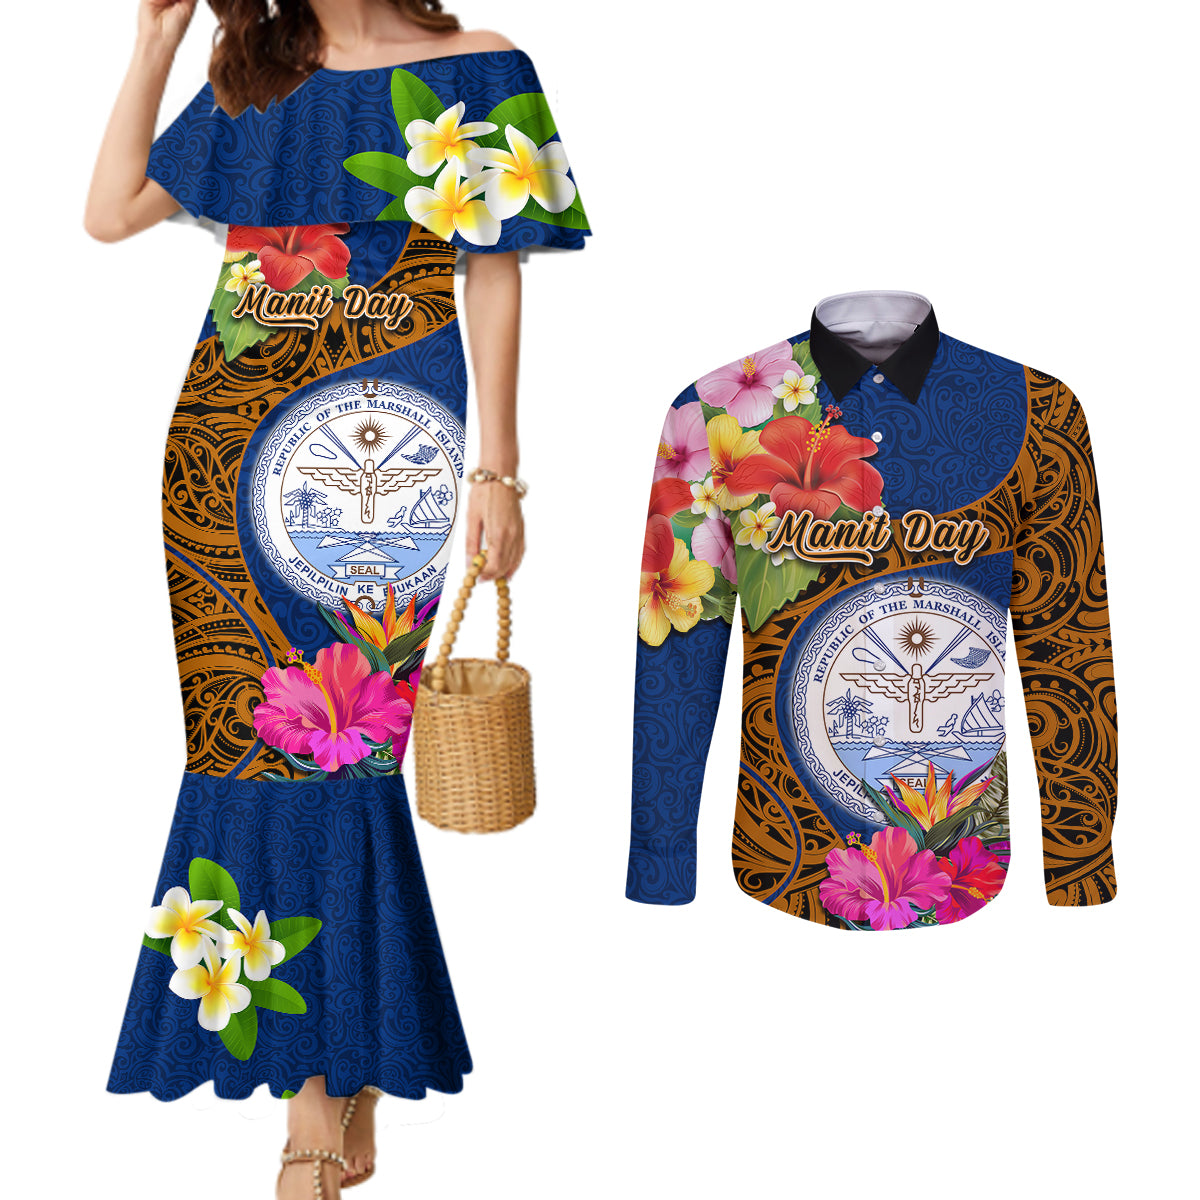 marshall-islands-manit-day-couples-matching-mermaid-dress-and-long-sleeve-button-shirts-marshall-seal-mix-hibiscus-flower-maori-pattern-style